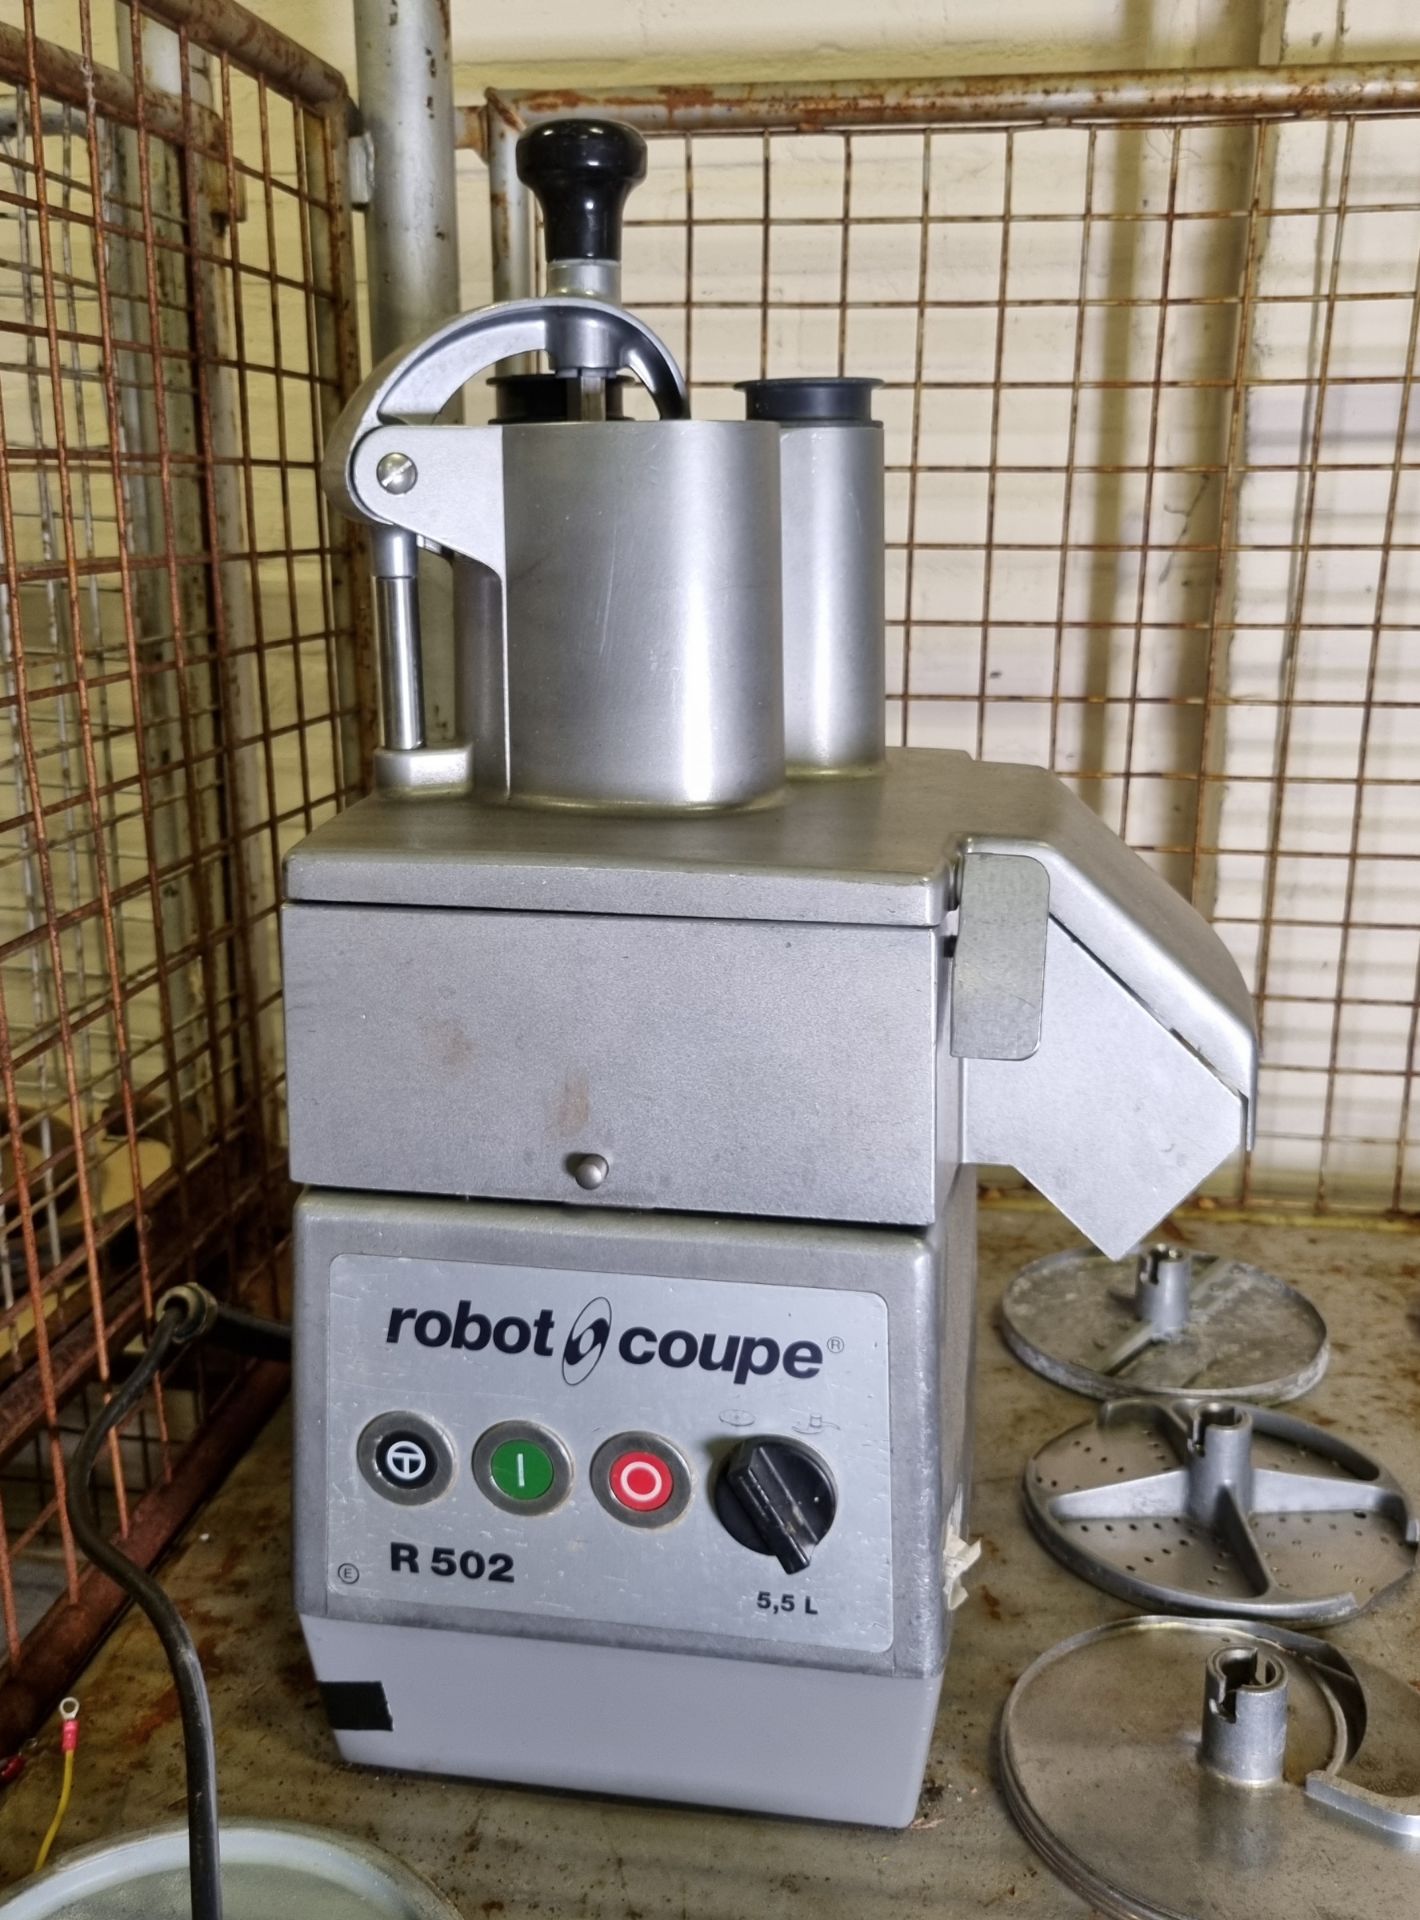 Robot Coupe R 502 veg prep machine with multiple types of cutting blades - Image 2 of 6